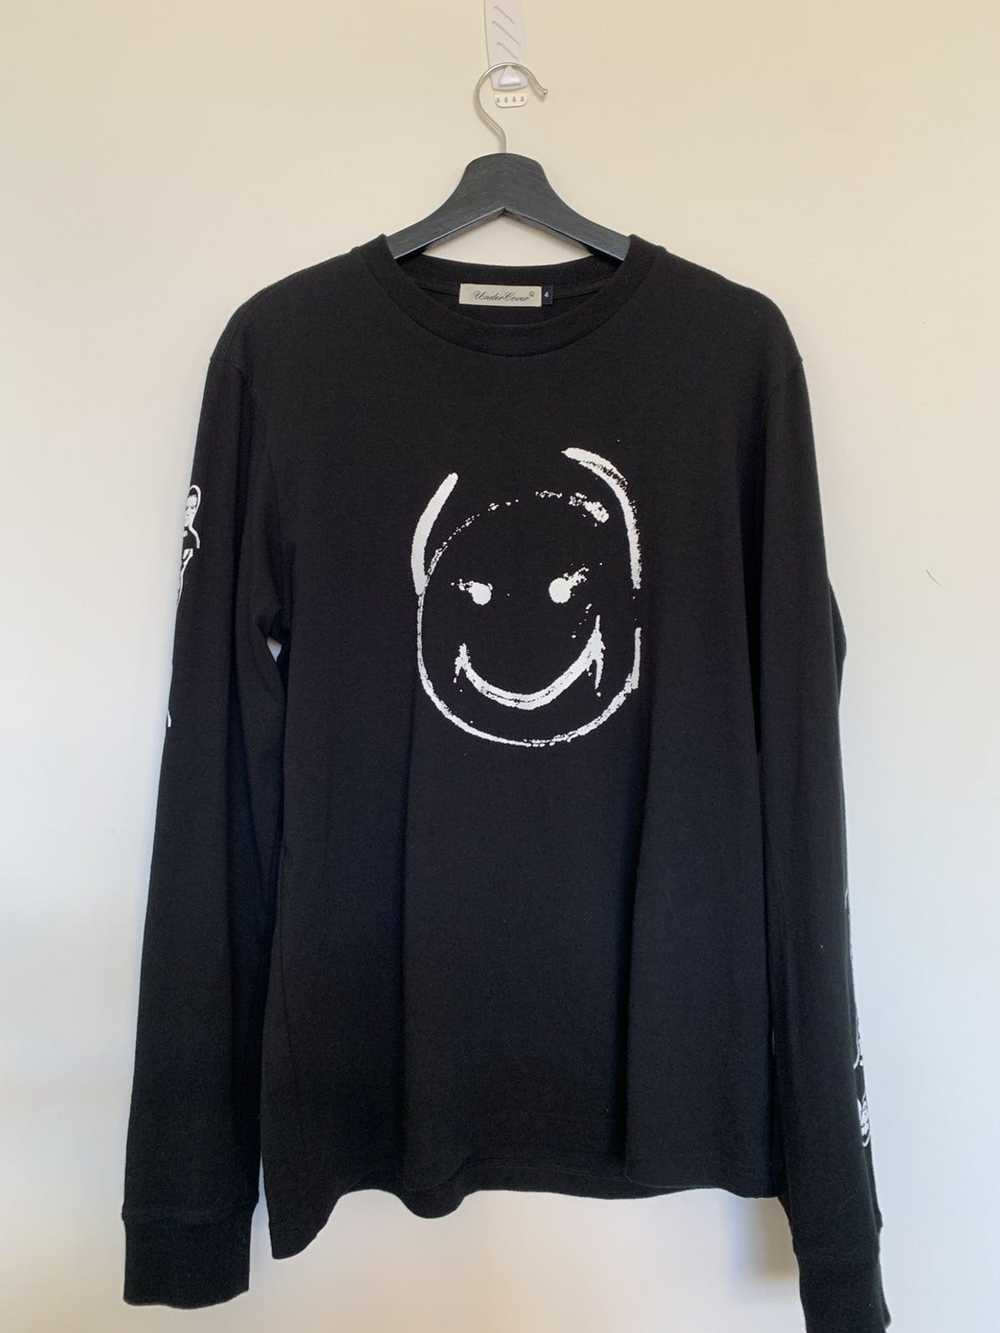 Undercover Undercover Smiley Face Long Sleeve Tee - image 1